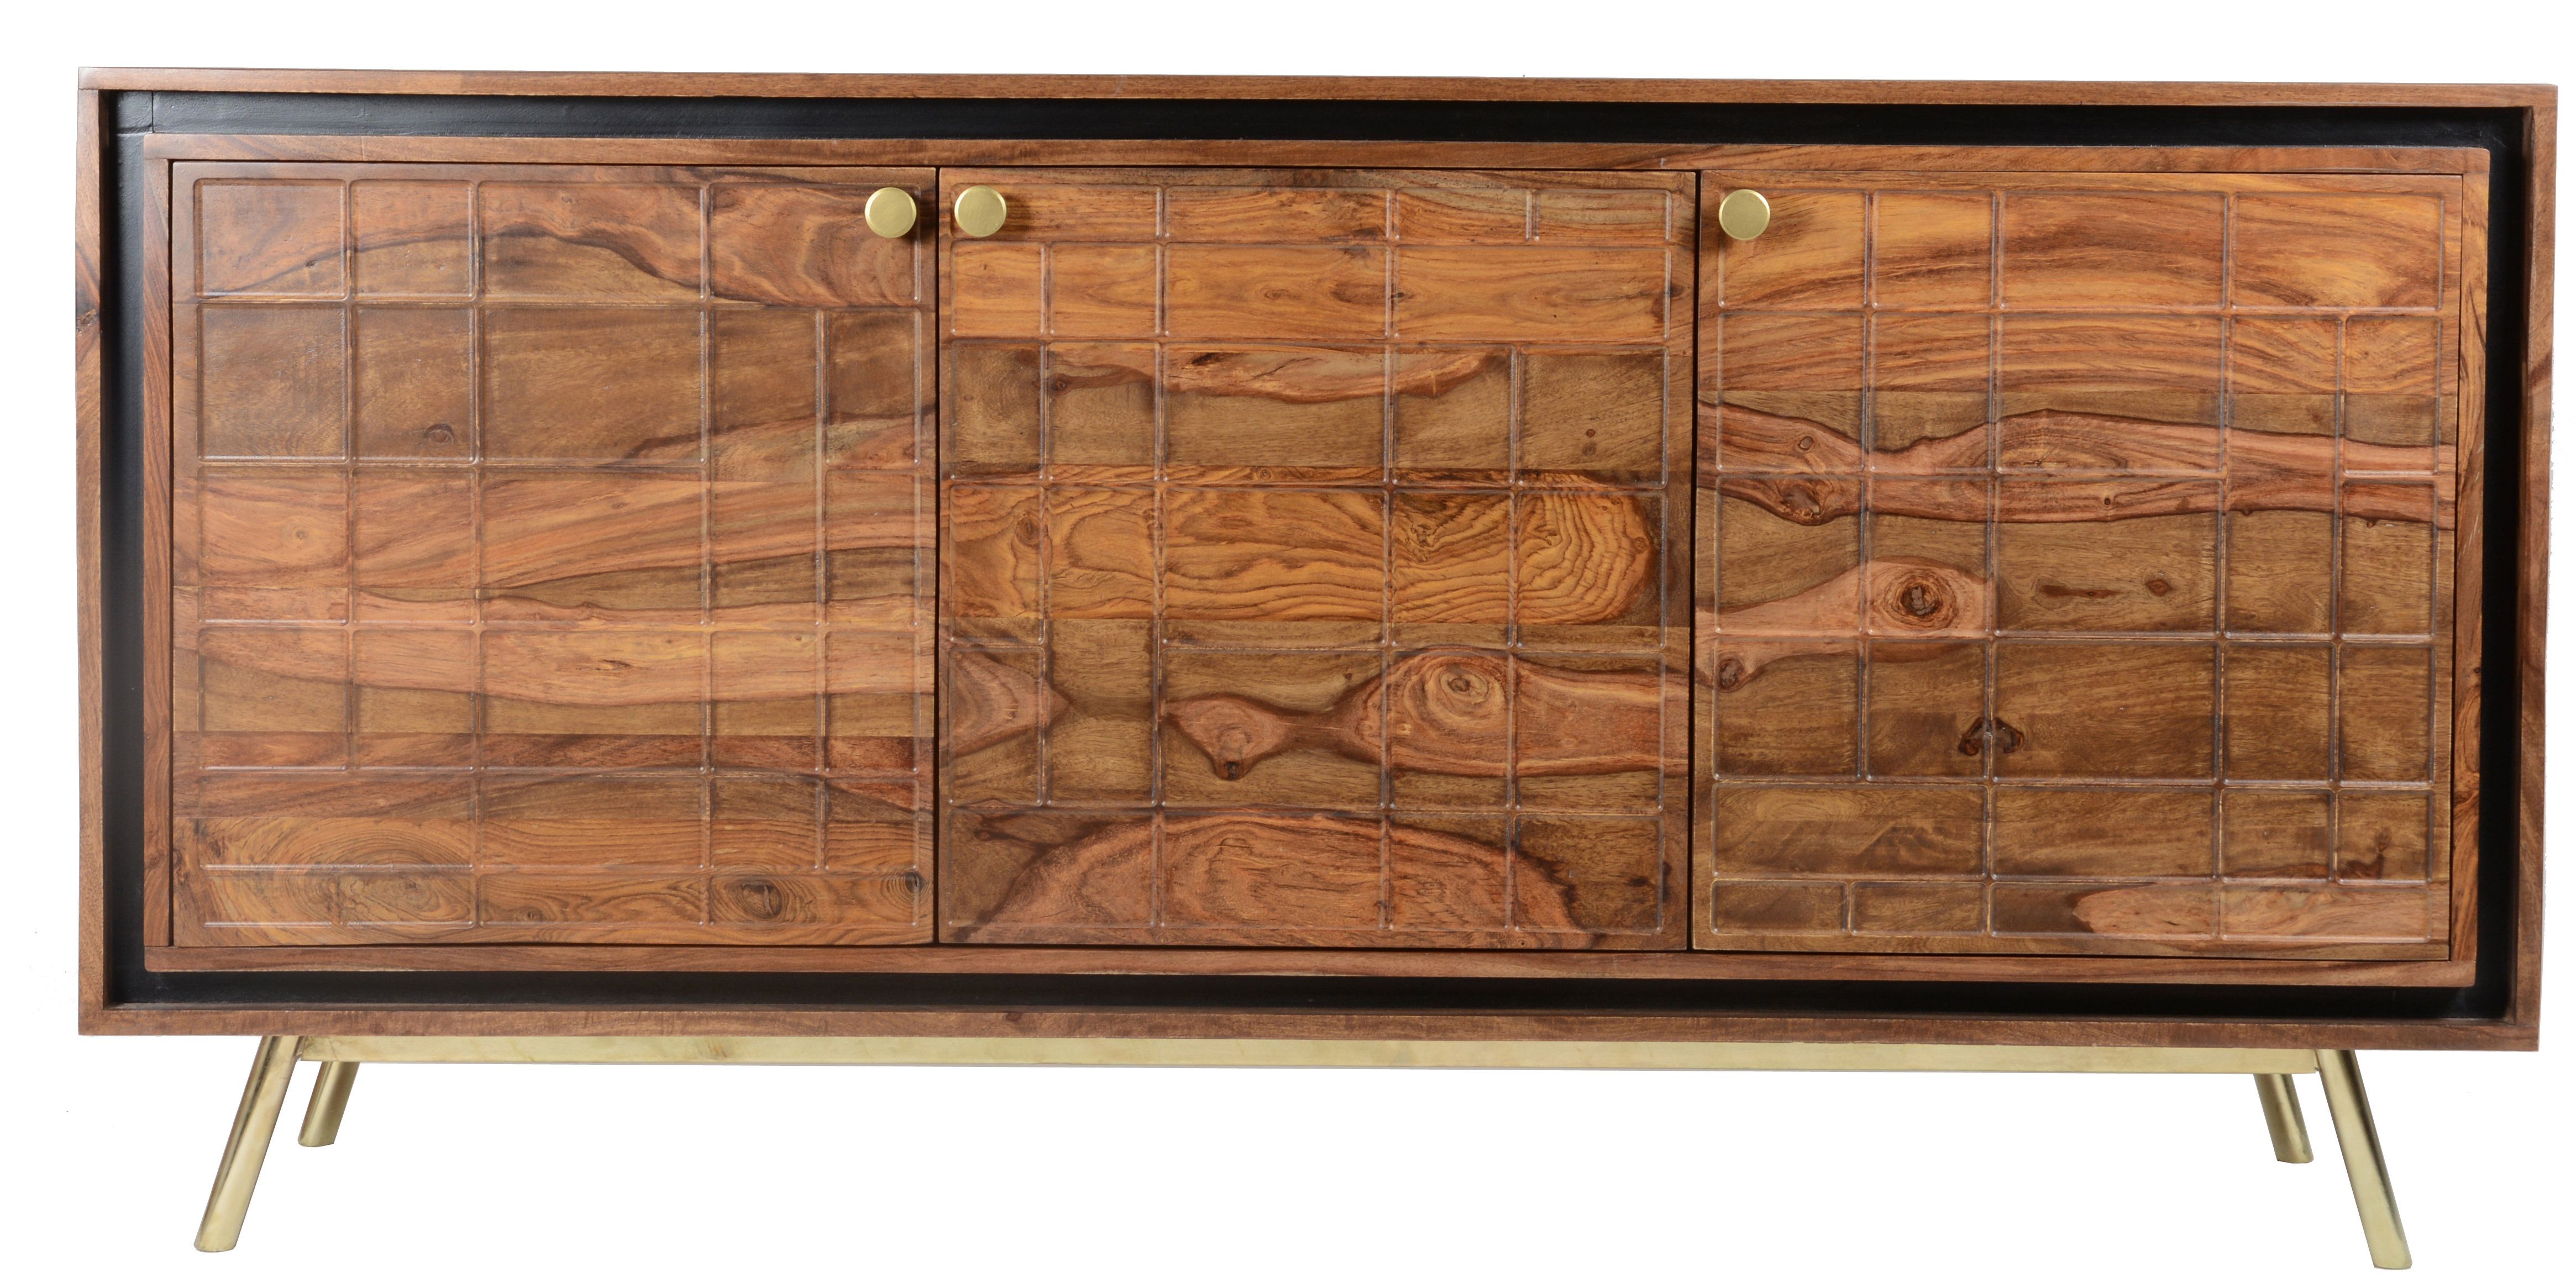 Extra Long Sideboard | Wayfair Throughout Current Arminta Wood Sideboards (View 13 of 20)